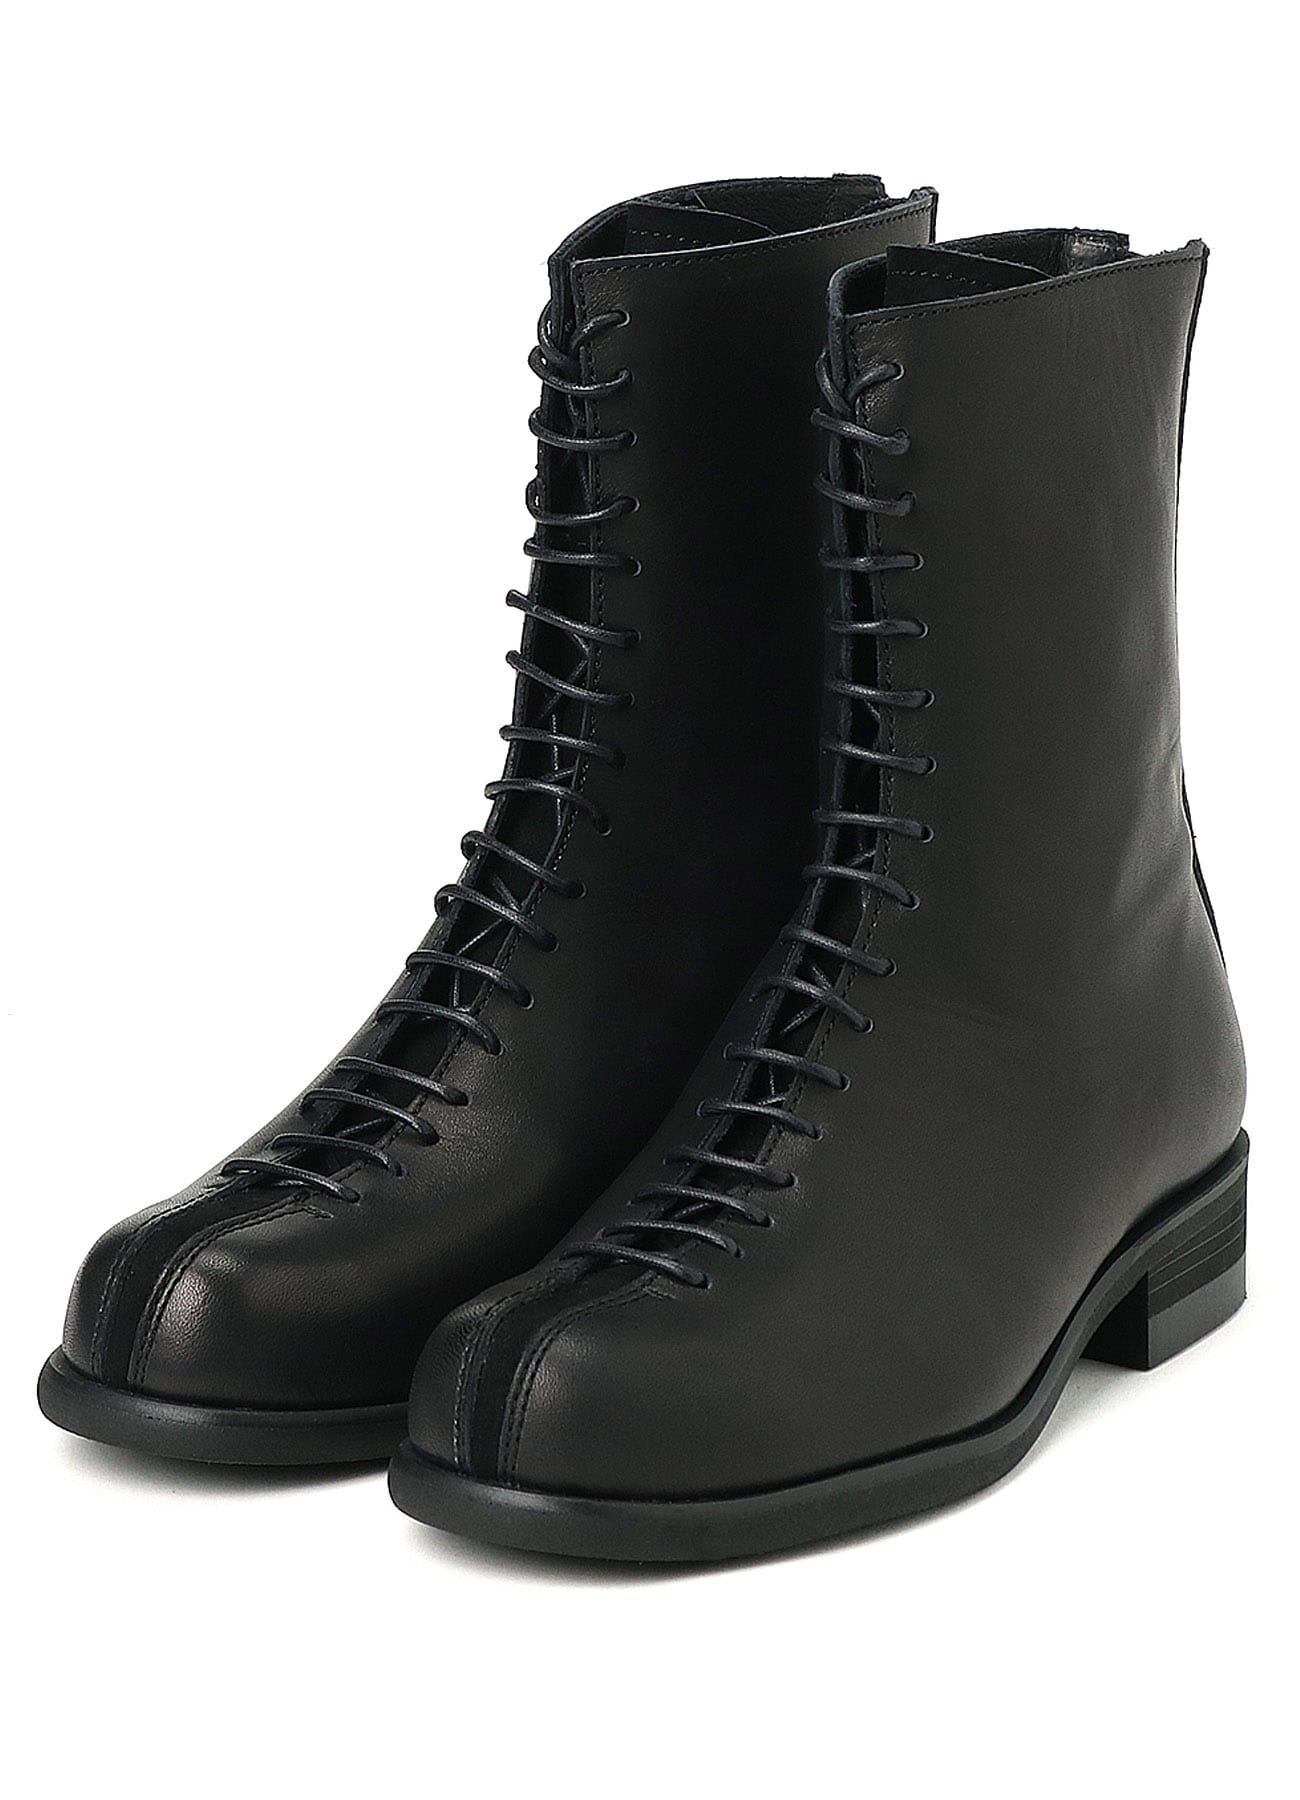 SEMI-GLOSS LEATHER LACE-UP BOOTS(US 5.5 Black): Vintage 1.1｜THE